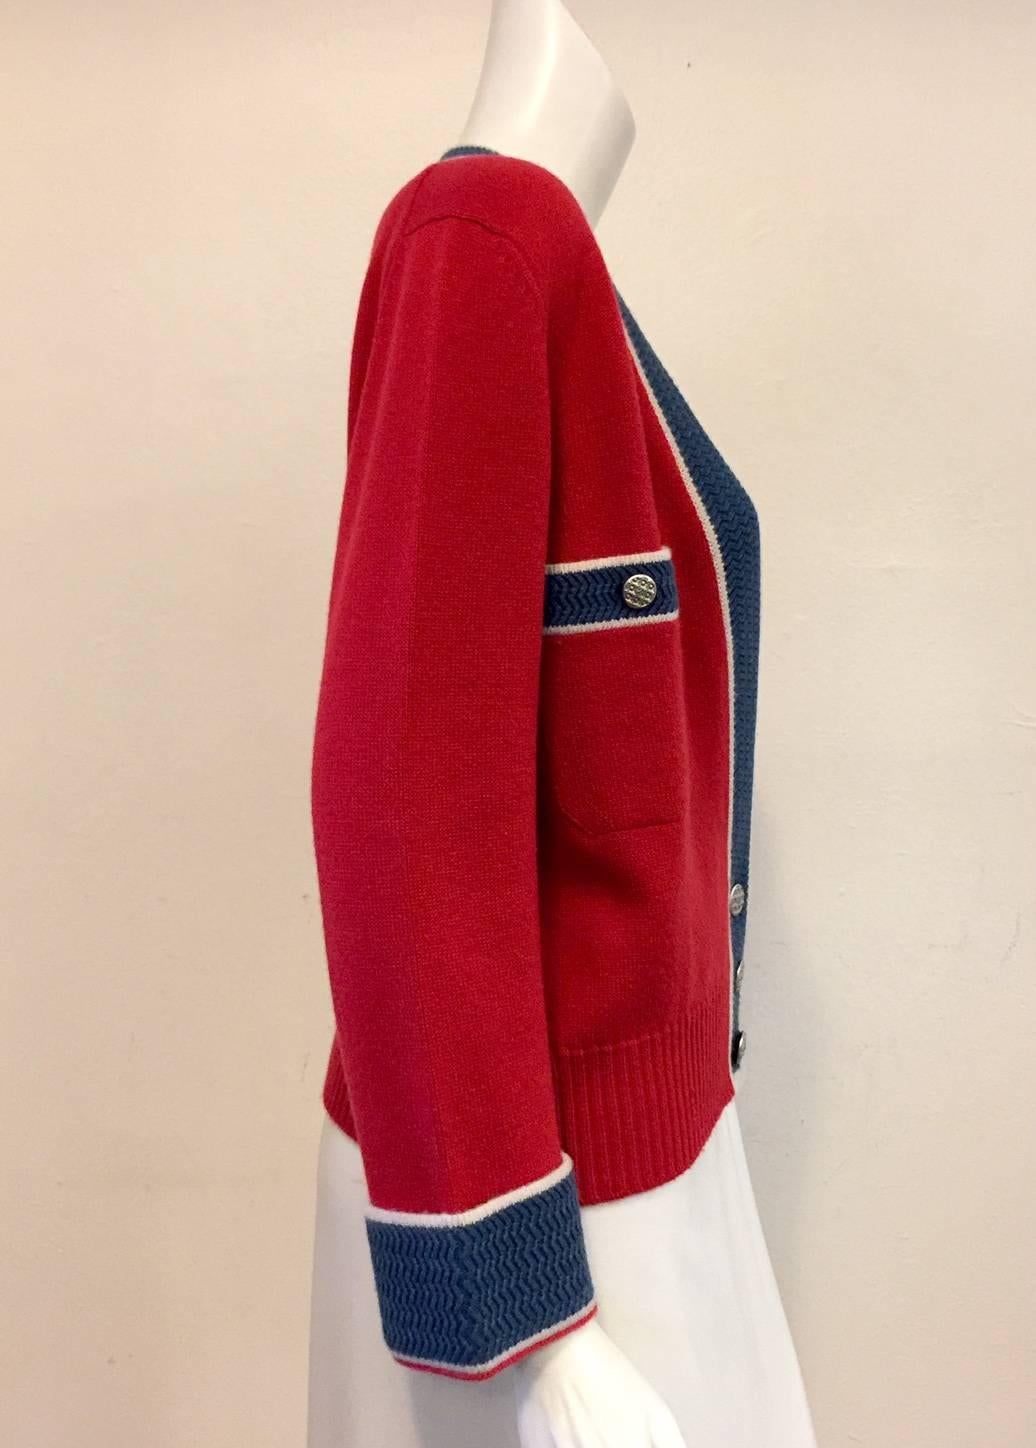 Chanel Red and Slate Blue Cardigan is deserving of a "Varsity Letter"!  Features exquisite cashmere, wide chevron-patterned banded trim, and 3 silver tone signature button closure.  Two buttoned pockets.  Made in The United Kingdom.  Above